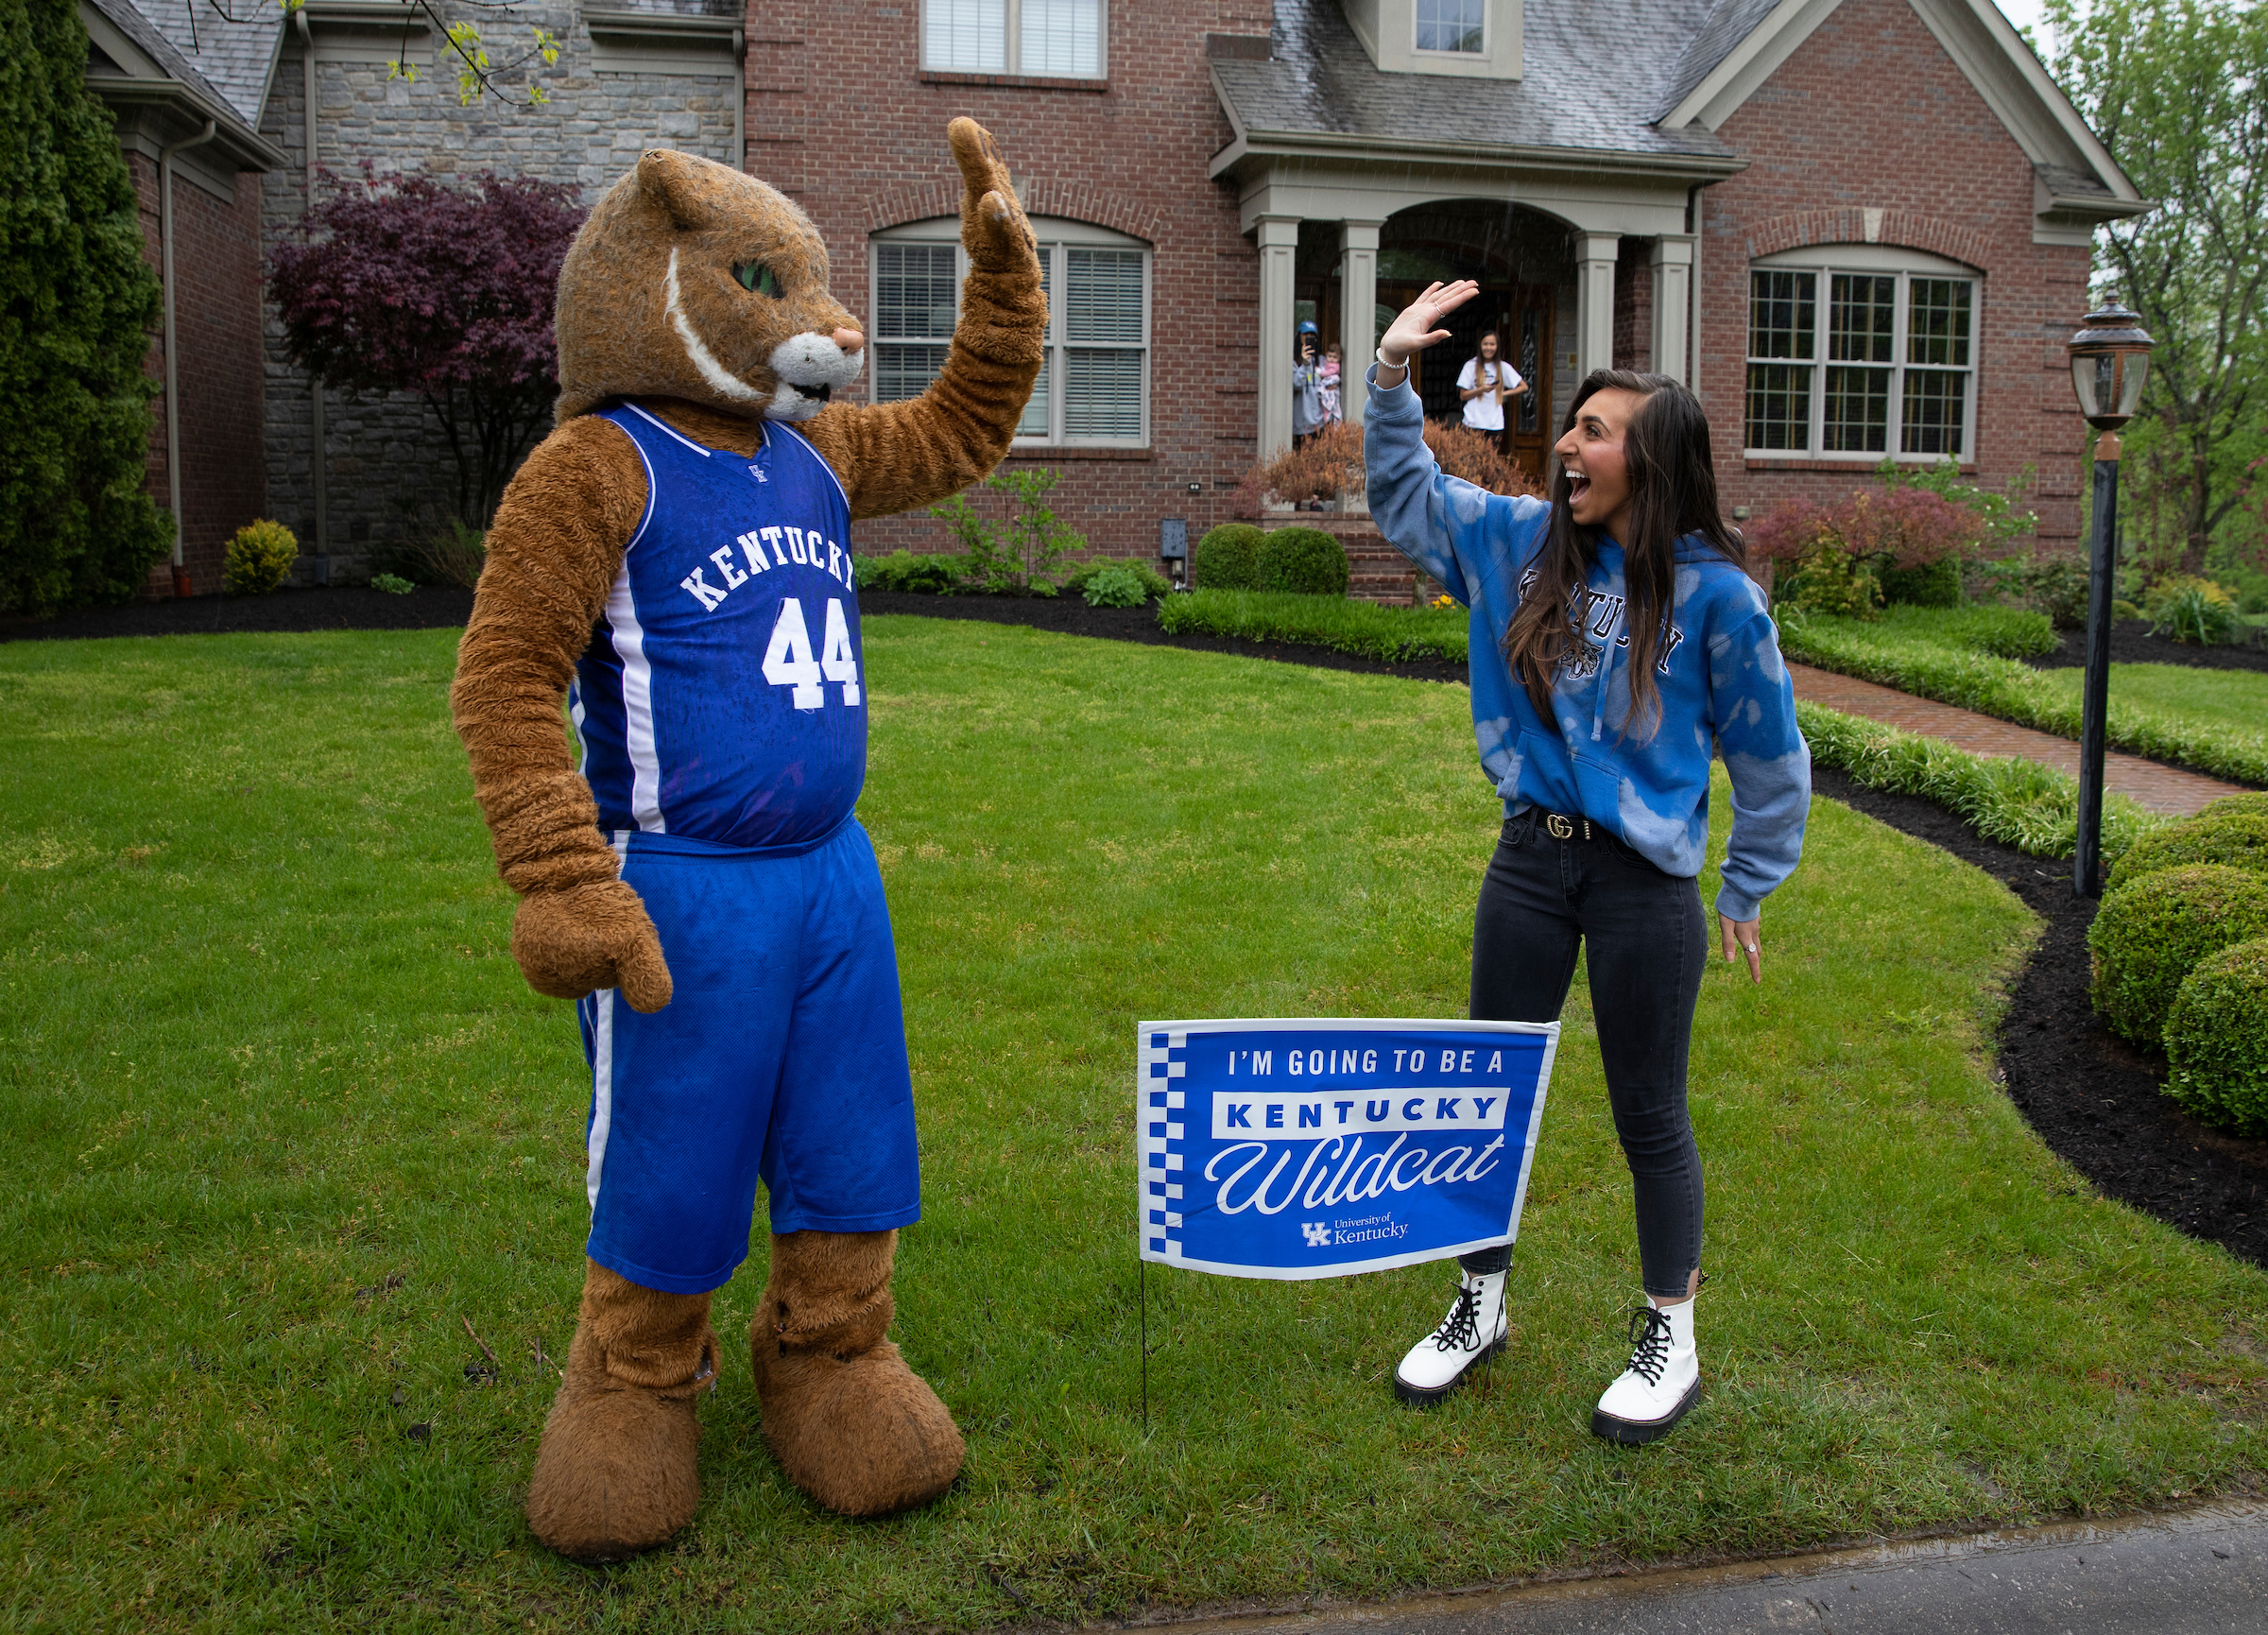 Wildcat and student high fiving in her front yard